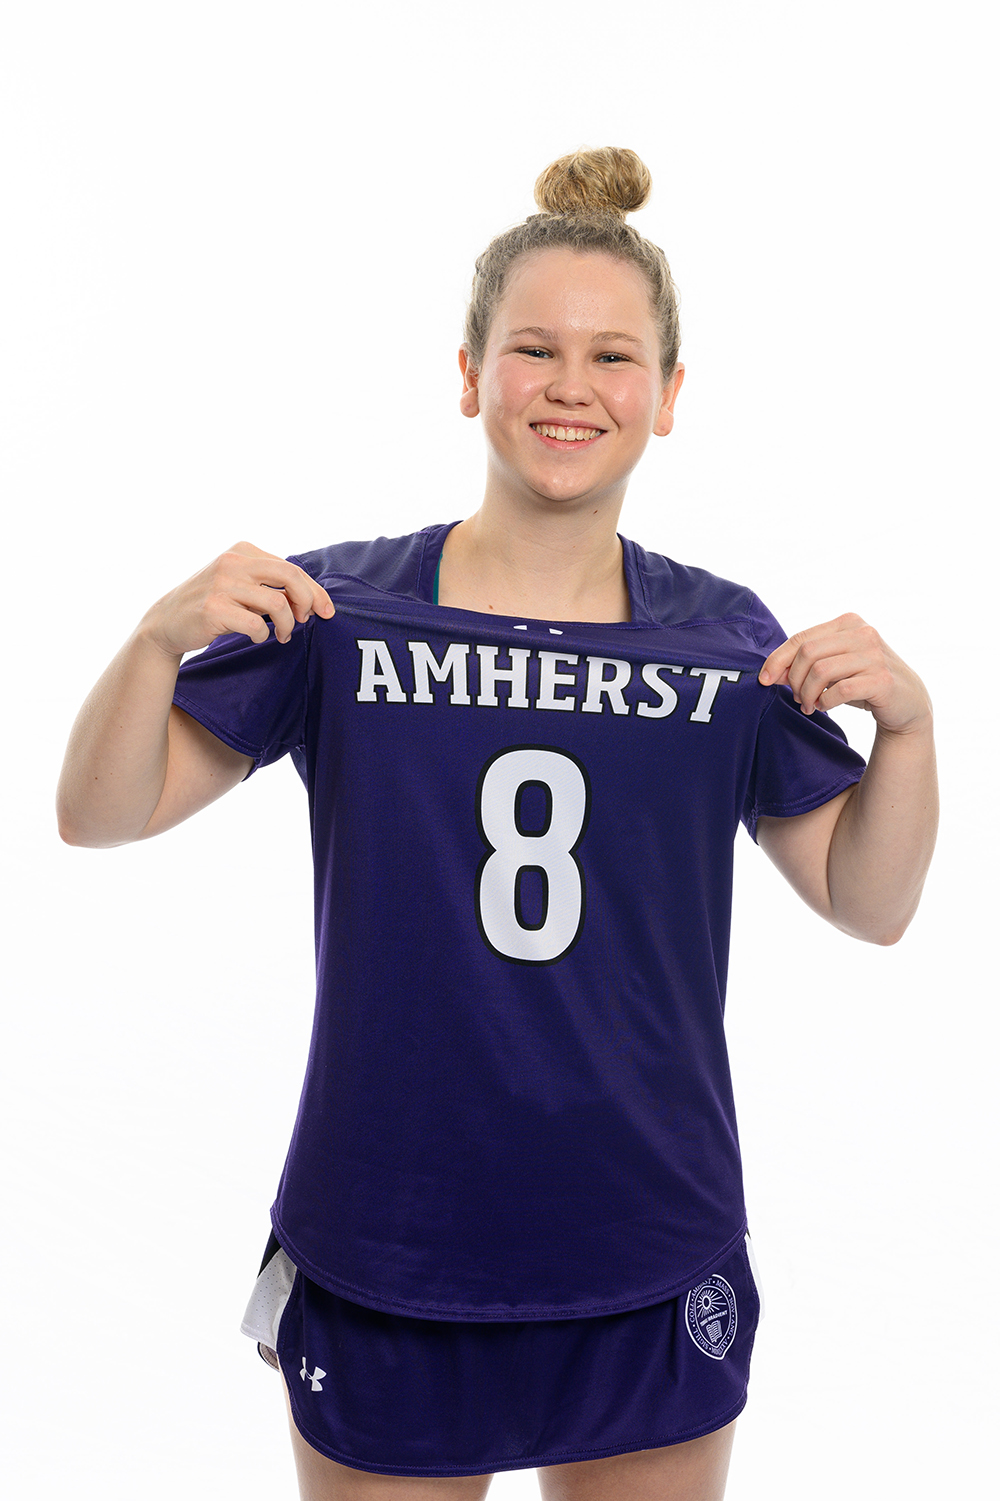  Charlotte Palmore played lacrosse at Amherst College. 